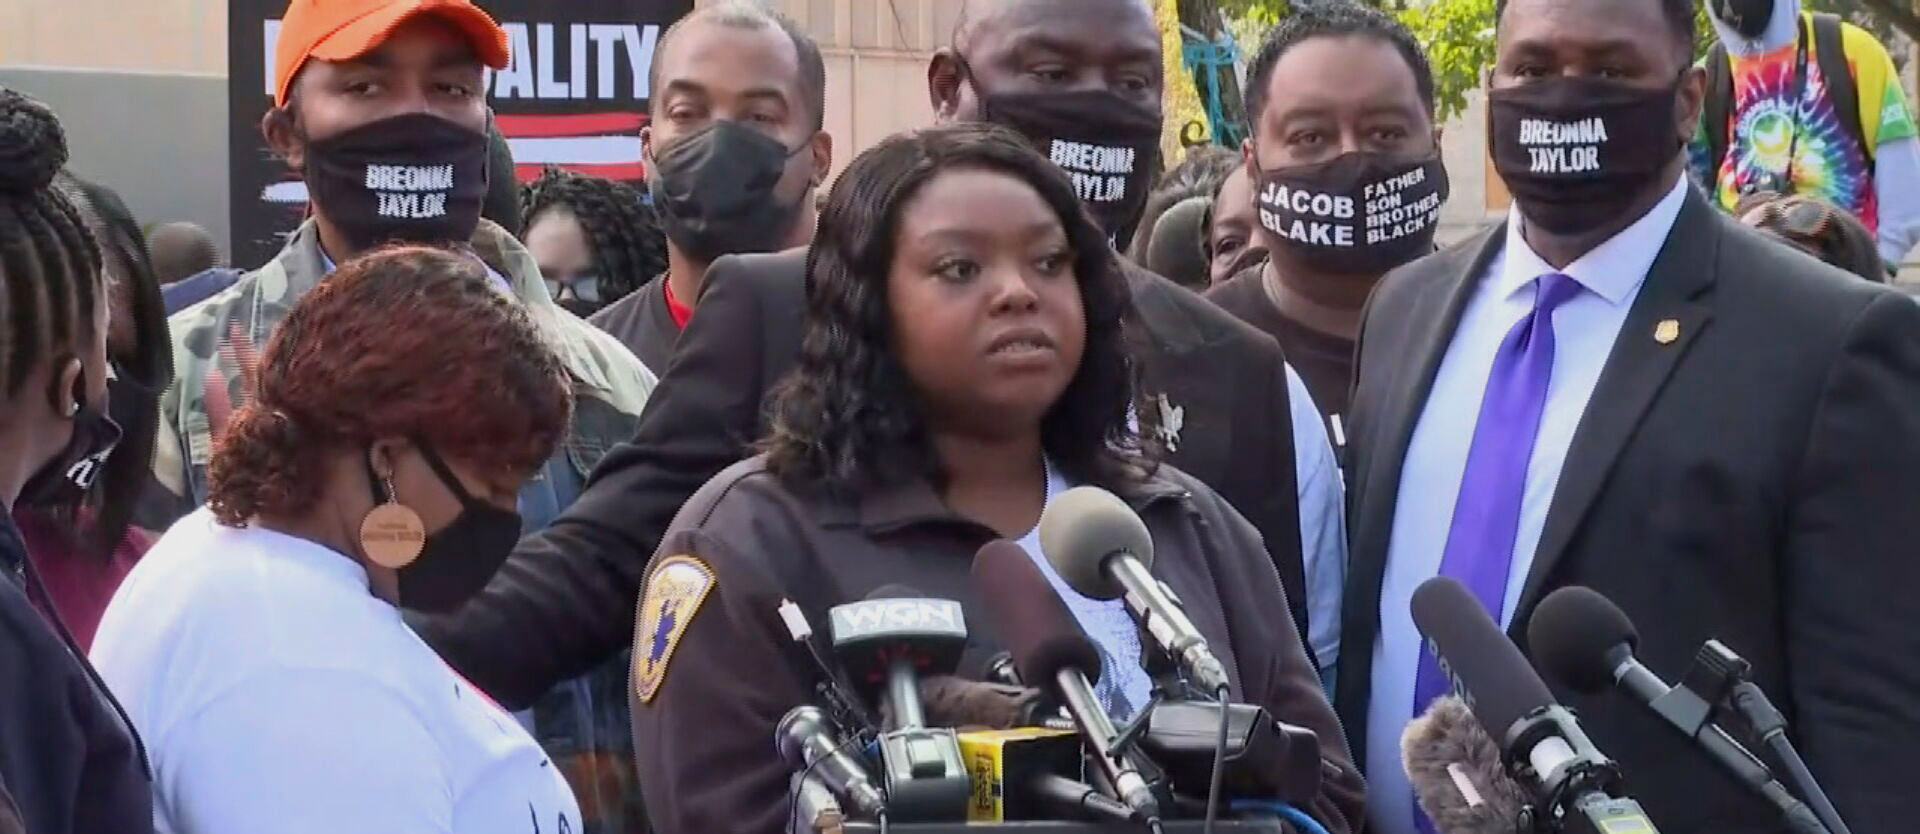 PHOTO: Bianca Austin, Breonna Taylor's aunt speaks at a press conference on Sept. 25, 2020.
